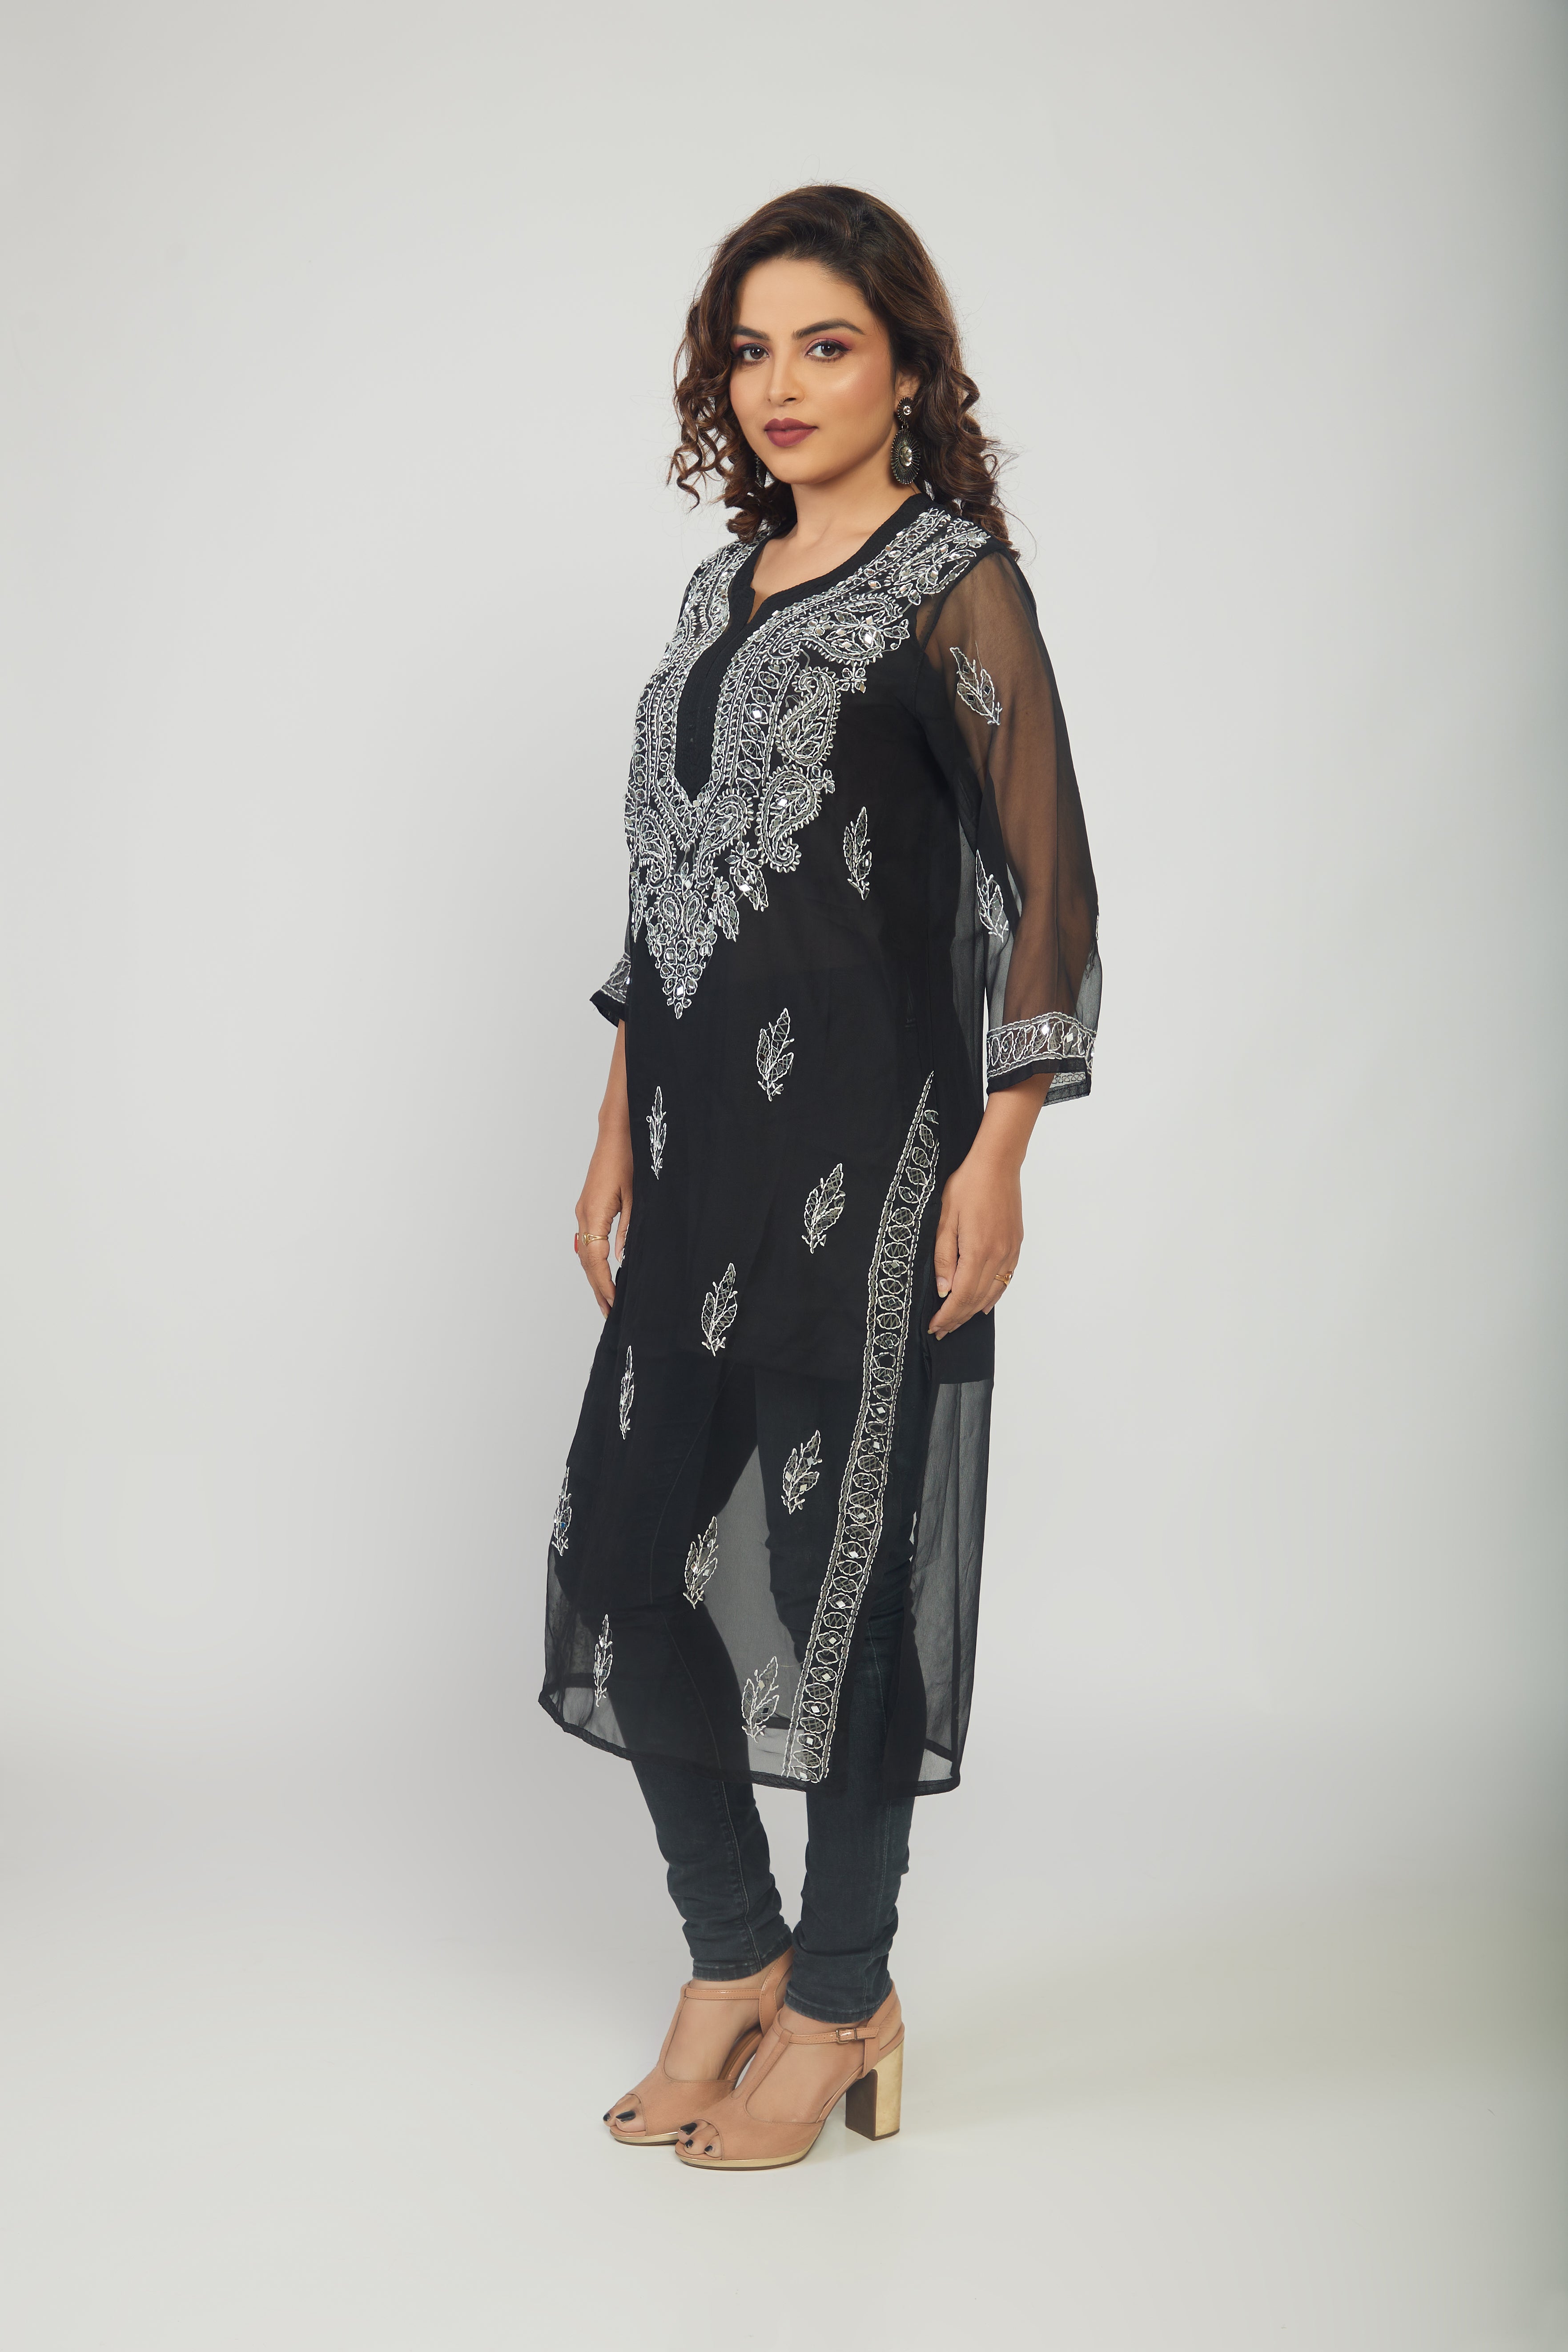 Ada Hand Embroidered Black Georgette Lucknow Chikan Kurti With slip - Ada -  3693906